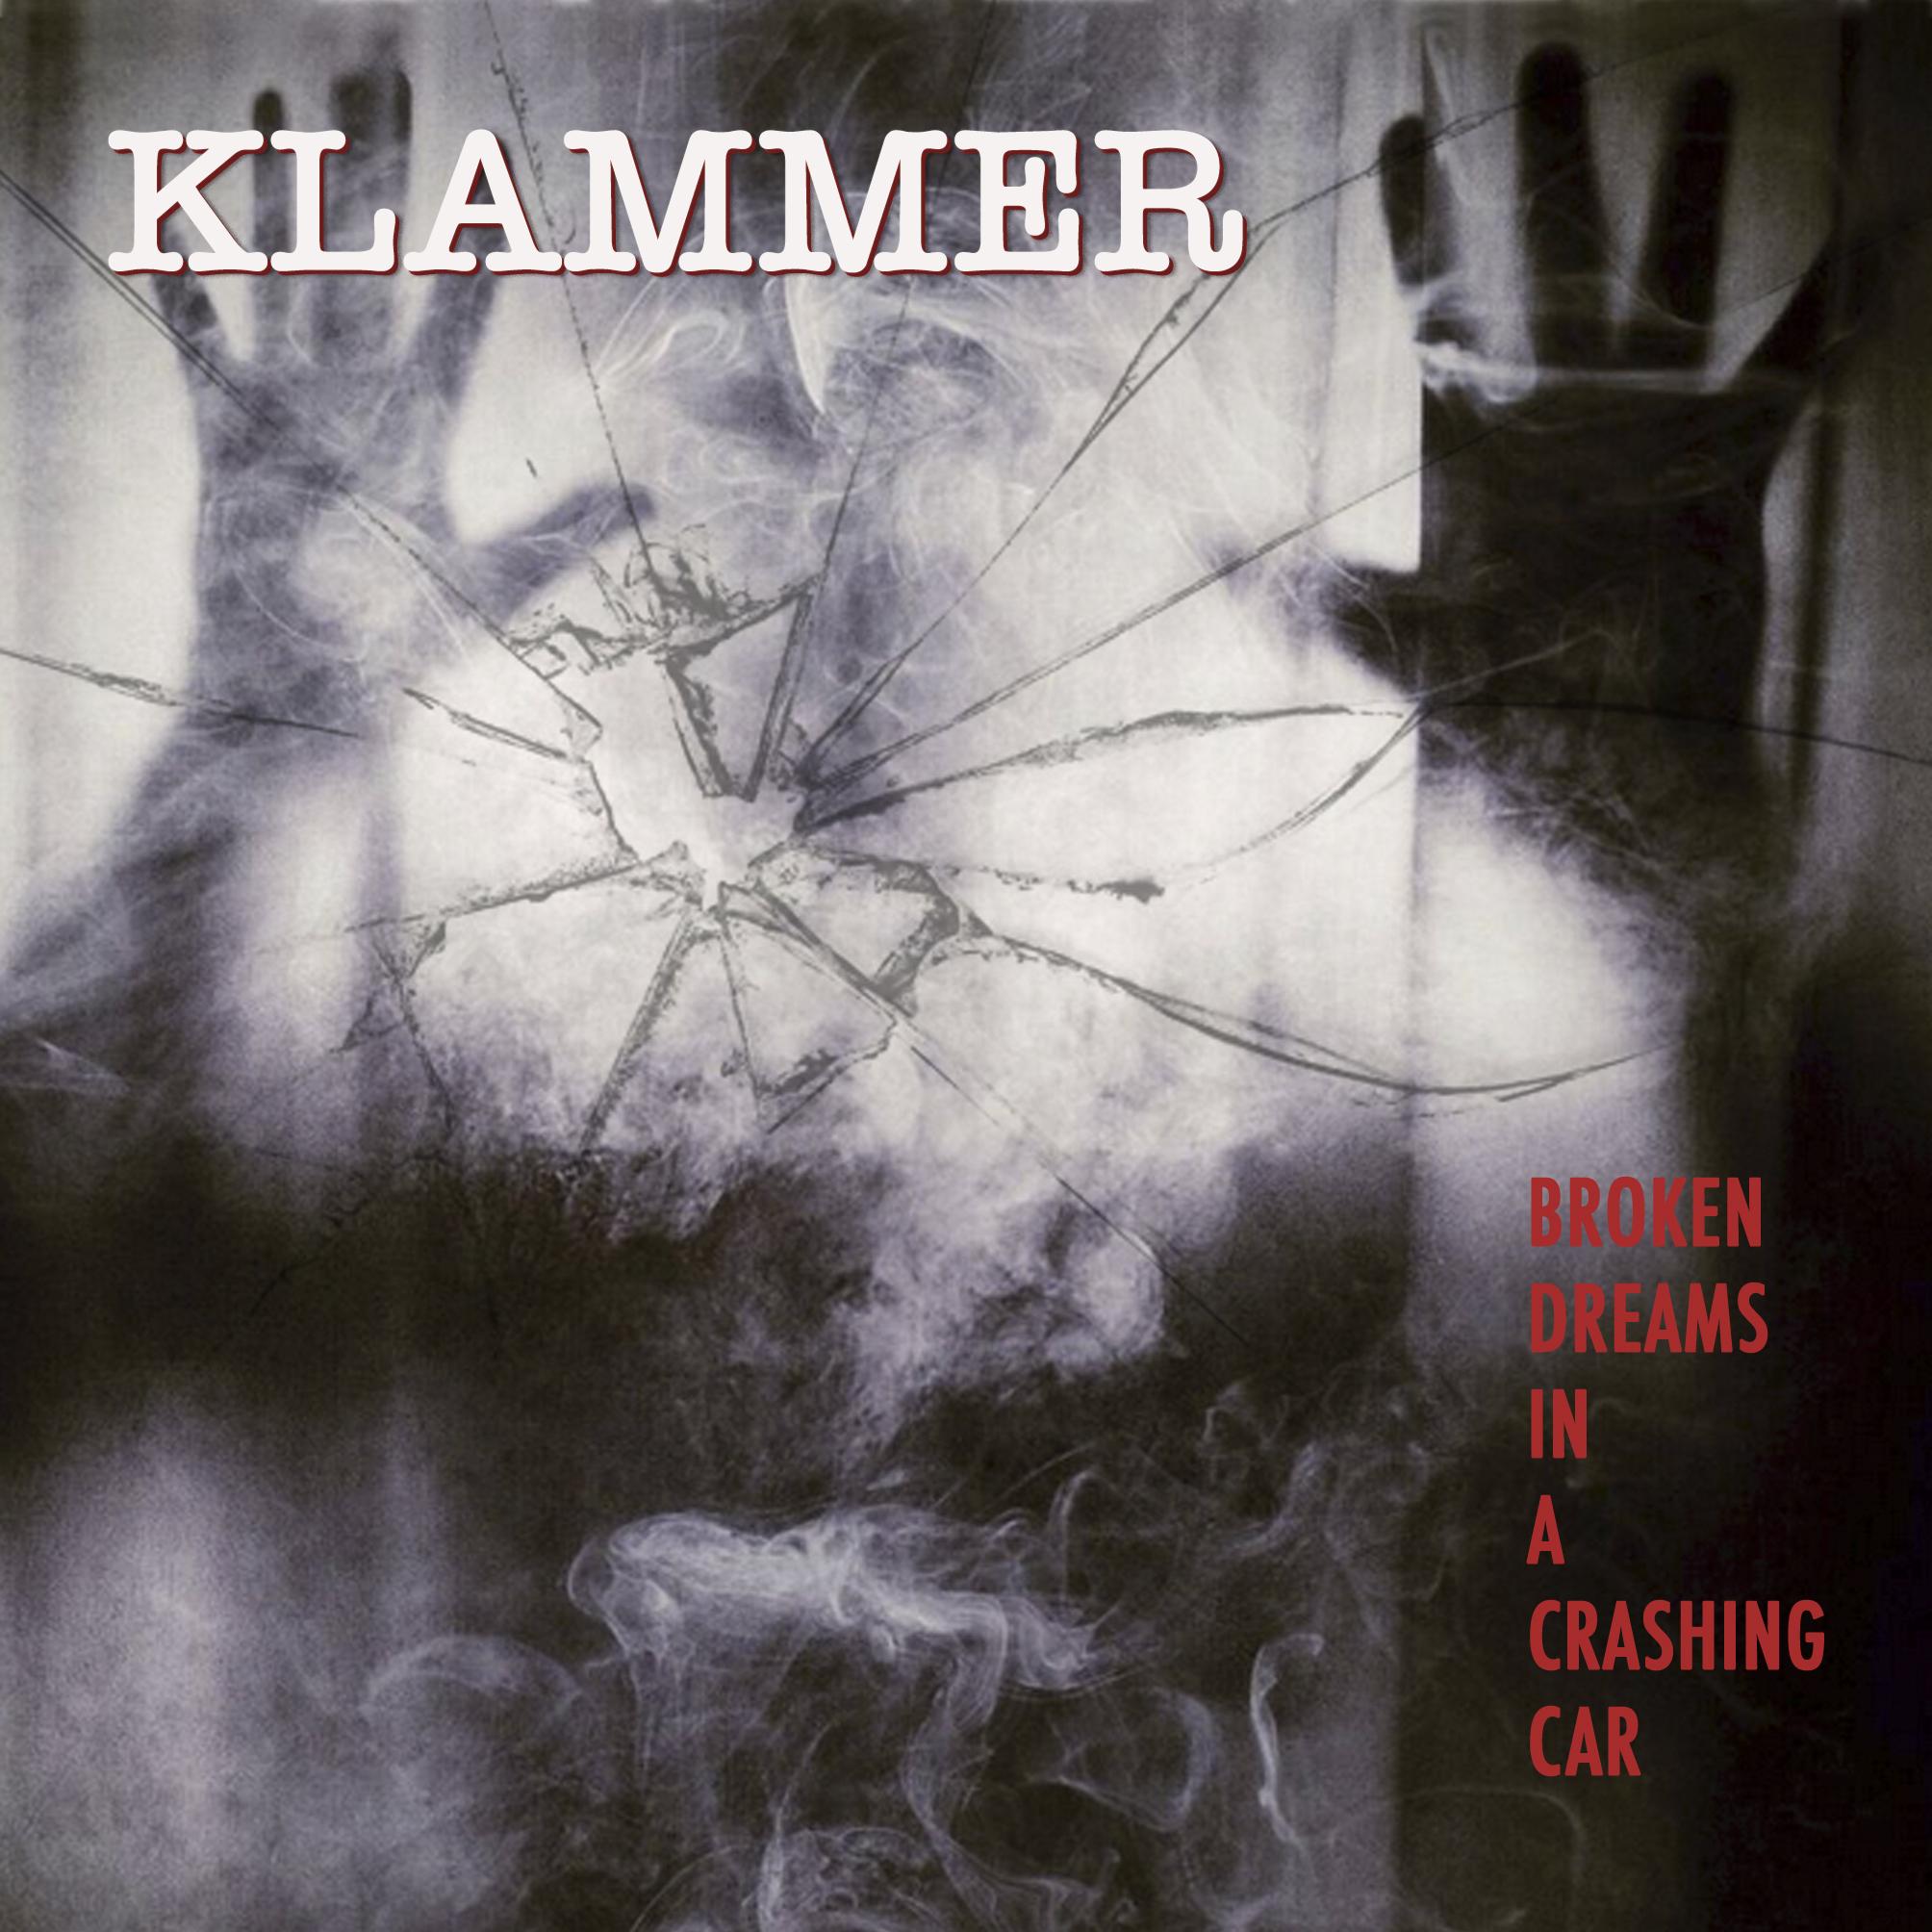 Klammer are Back with their new postpunk single